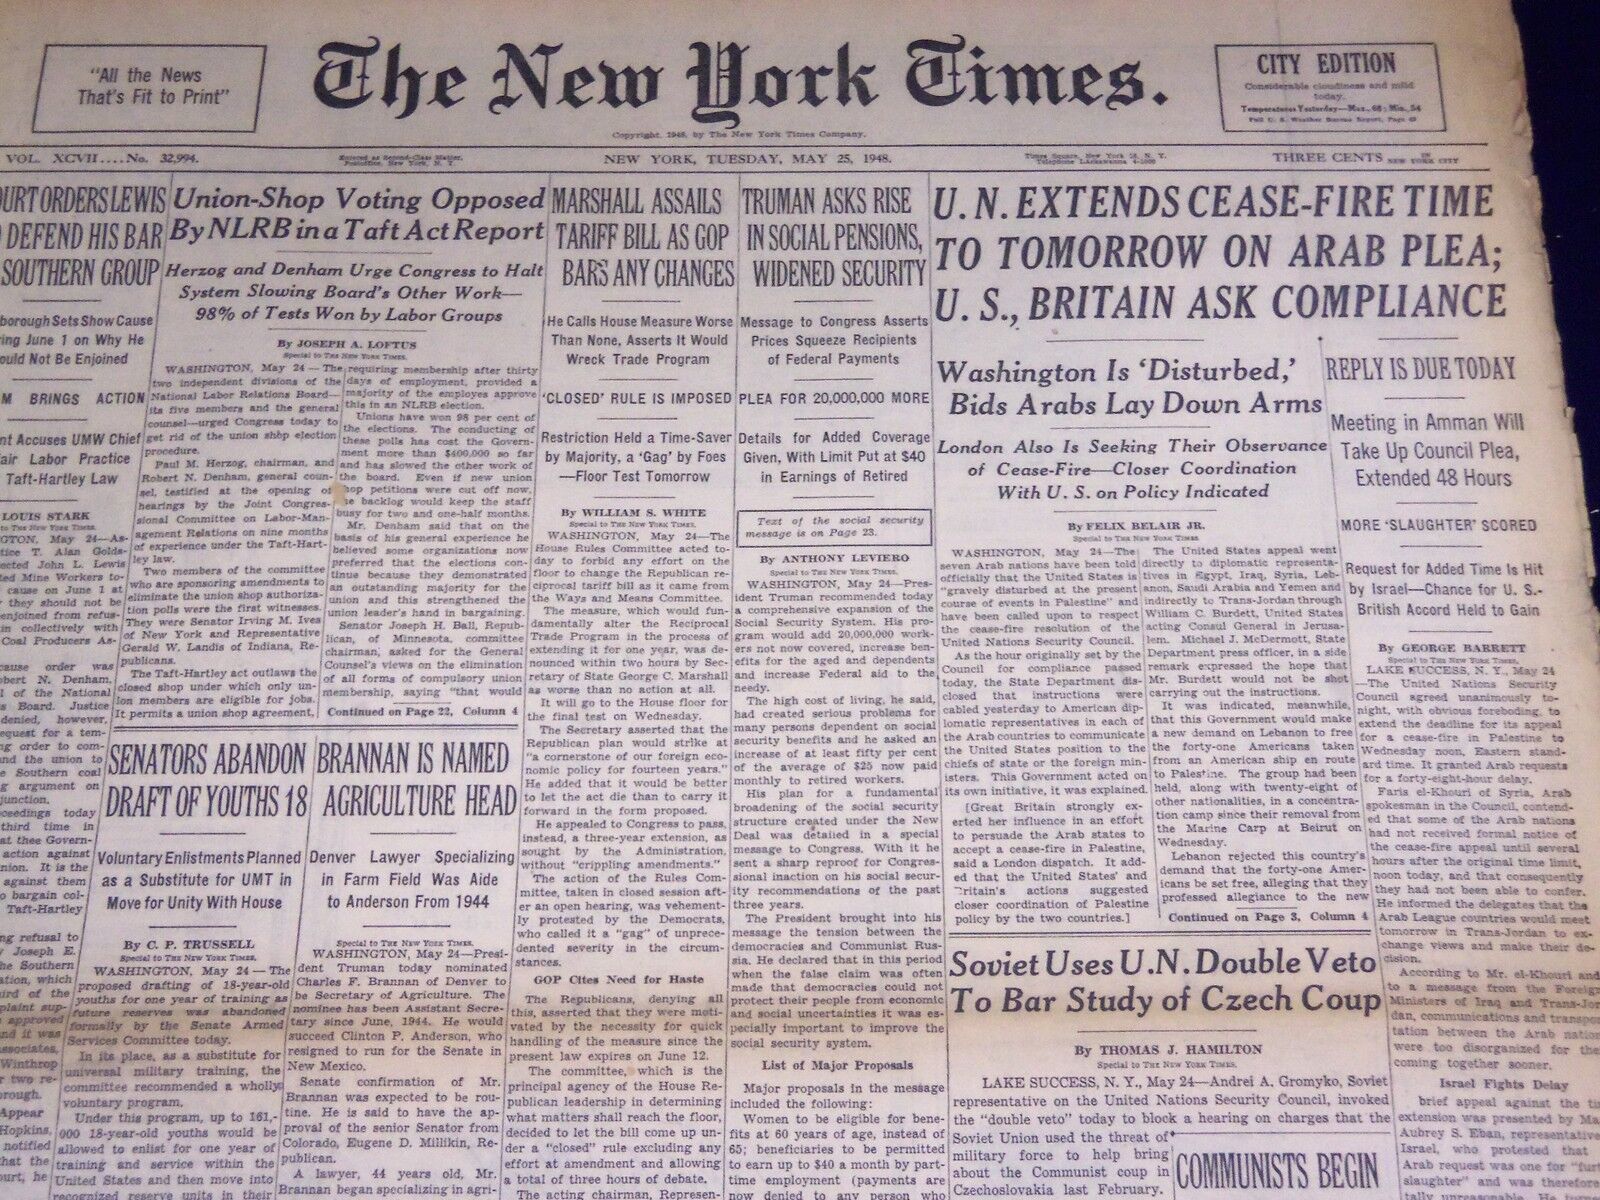 1948 MAY 25 NEW YORK TIMES - U. N. EXTENDS CEASE-FIRE TIME - NT 3593